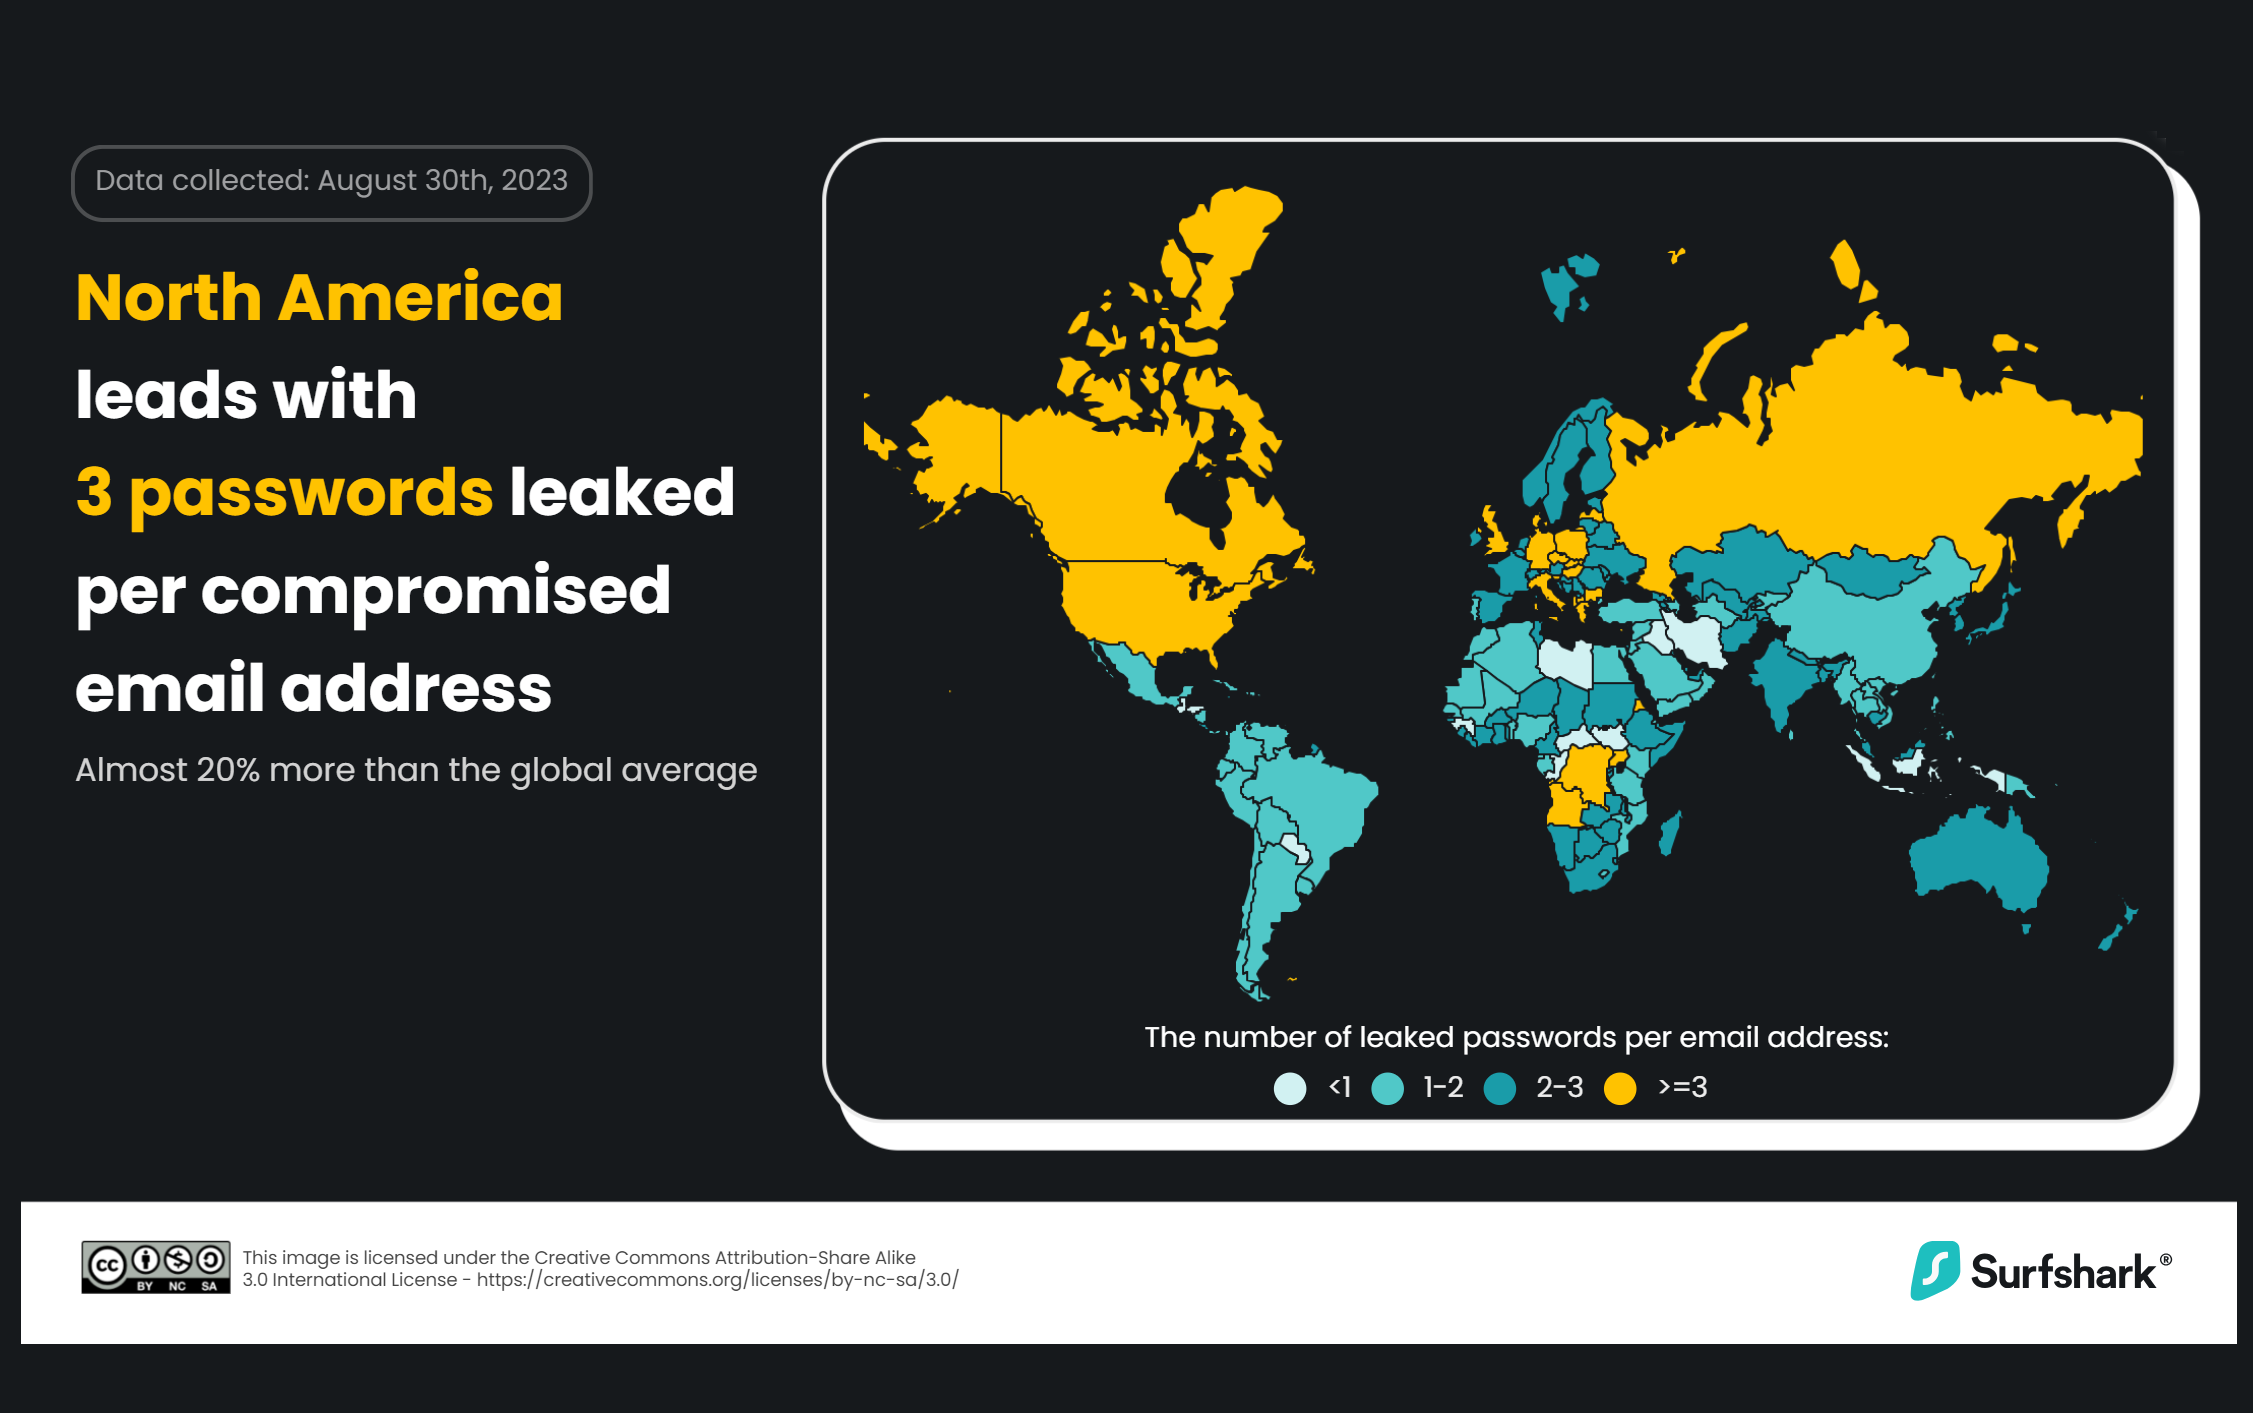 North Americans are the most affected by password leaks